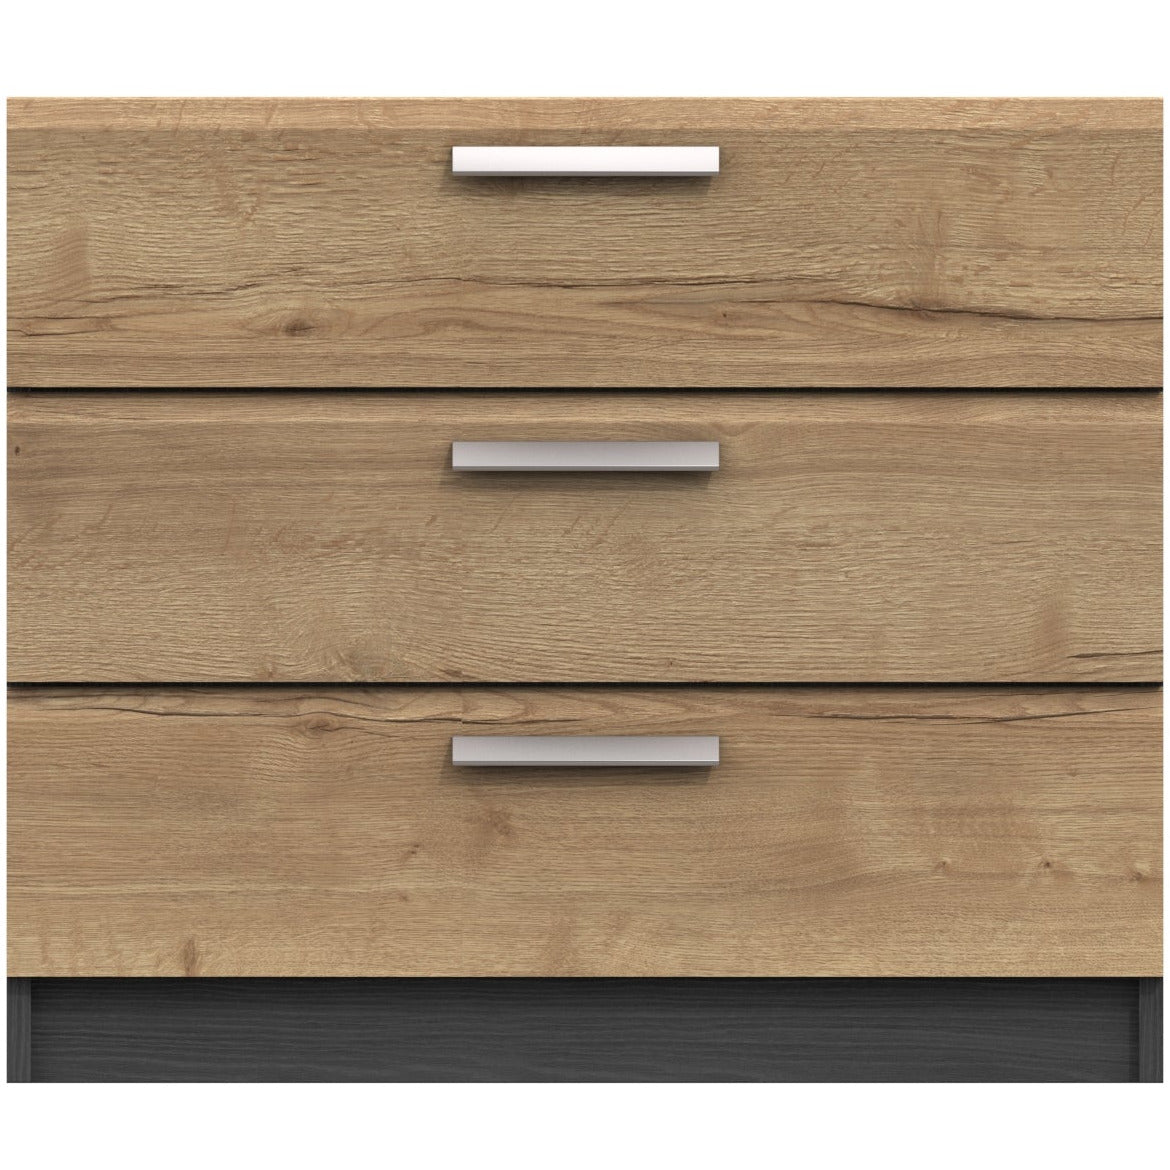 Waterfall 3 Drawer Chest of Drawers Graphite and Oak